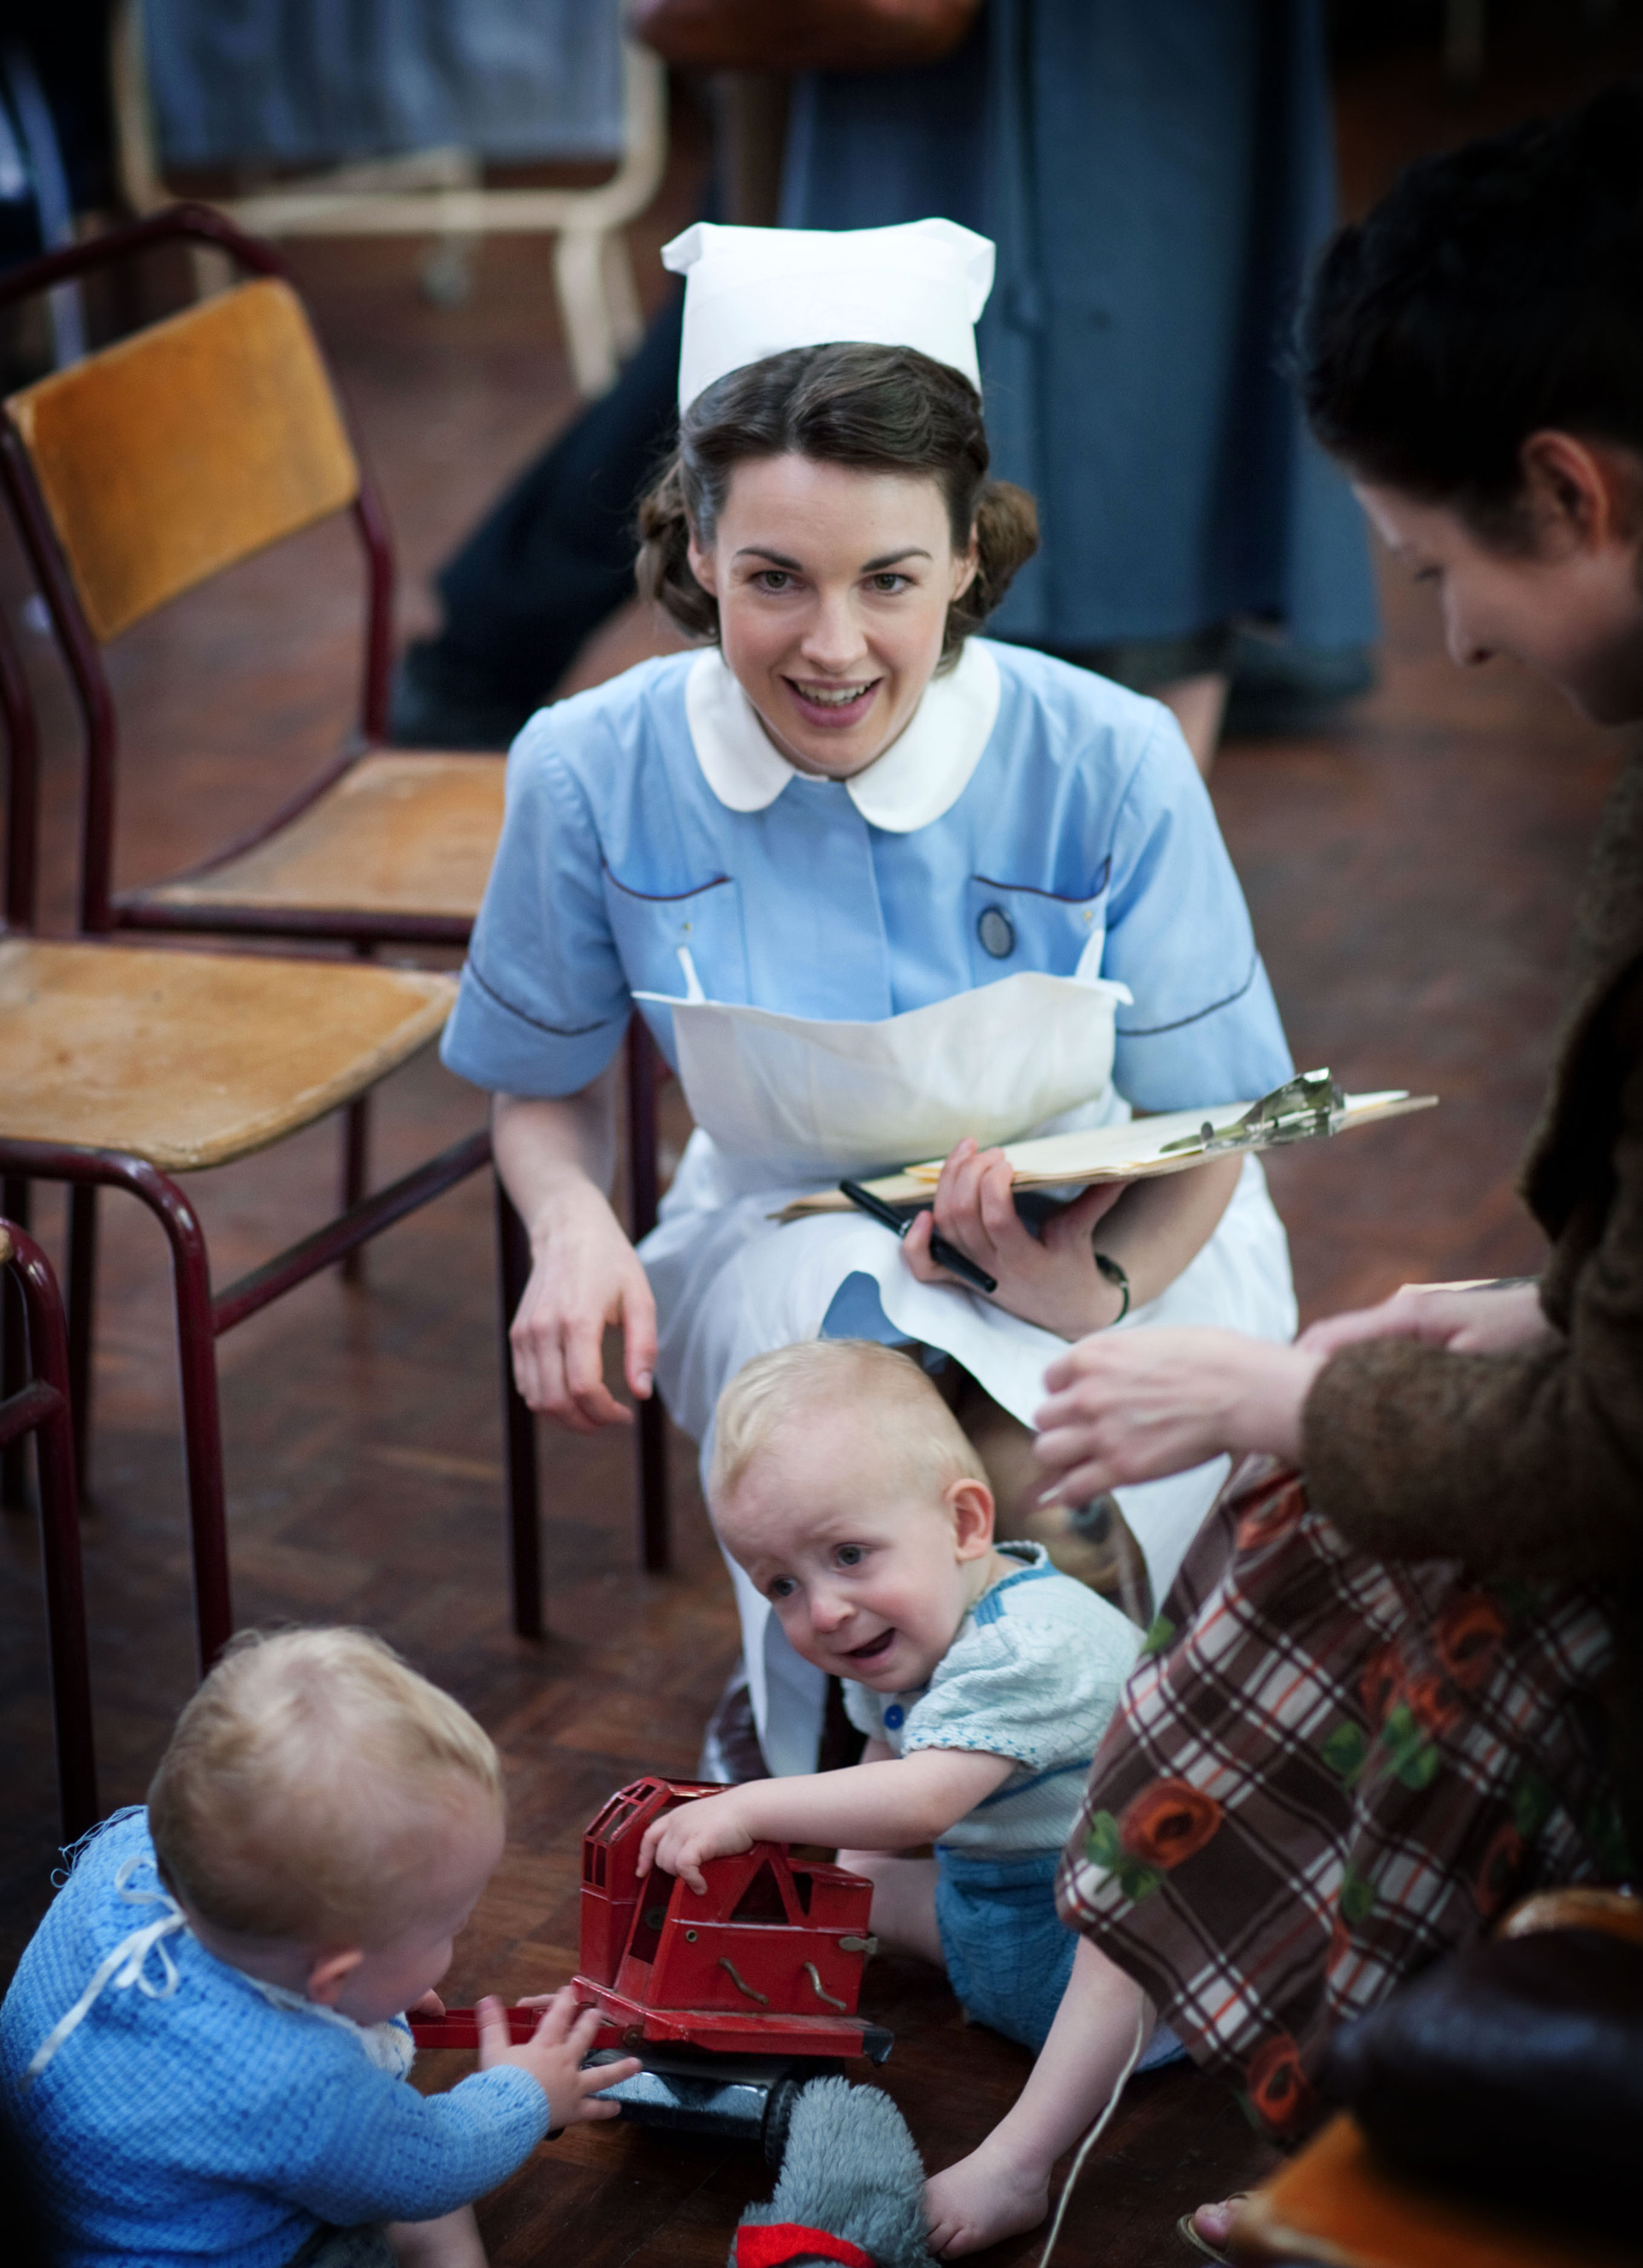 Call the Midwife Season 2 Still Hitting the Mark Modern Midwives